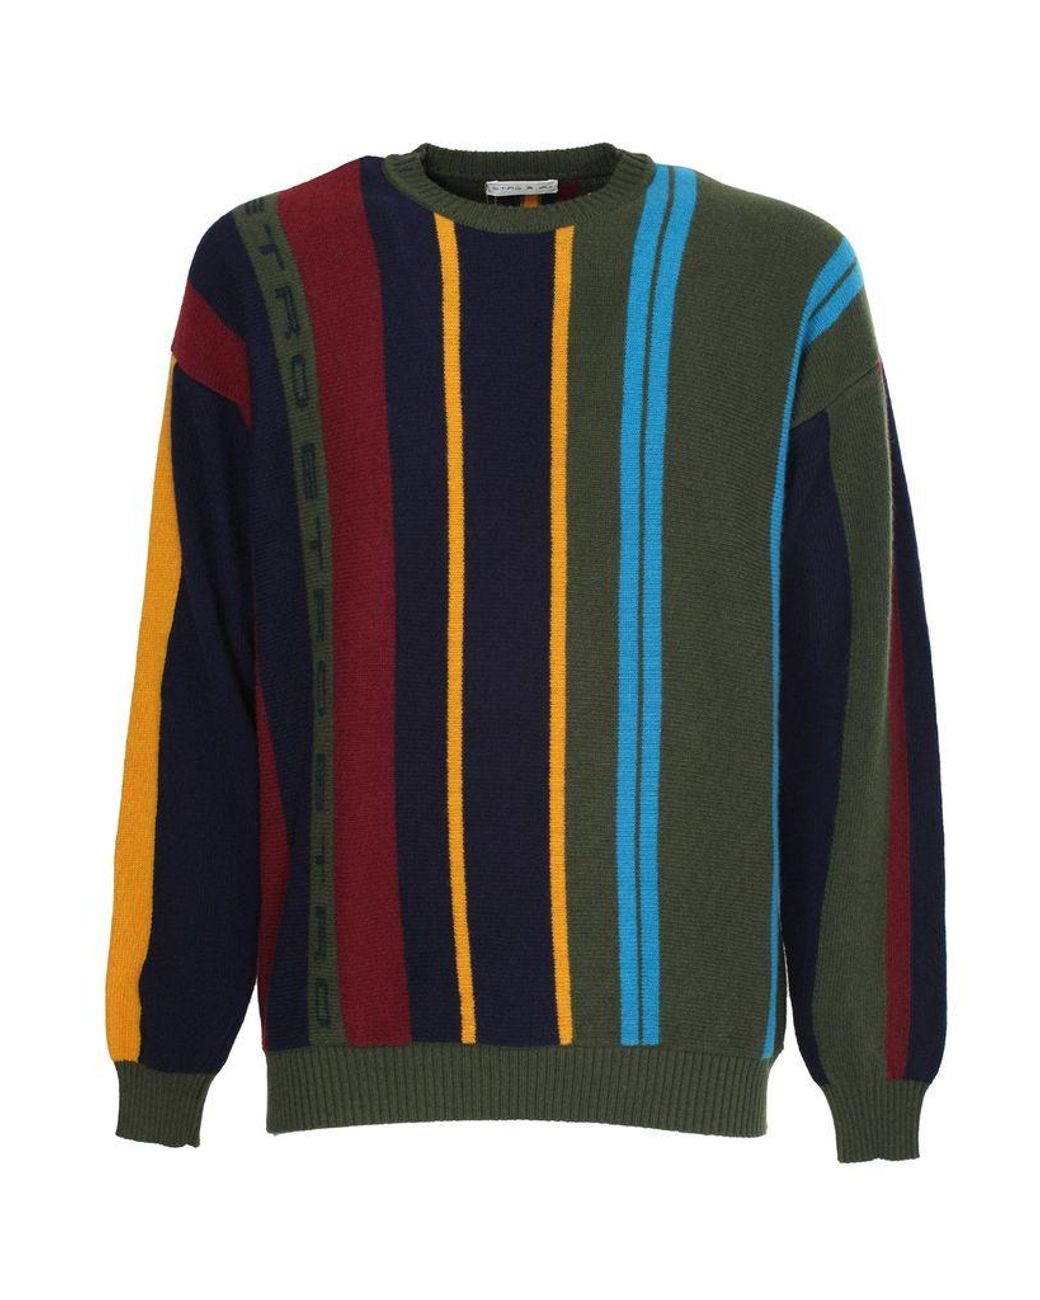 Etro Wool Pullover in Blue for Men - Lyst